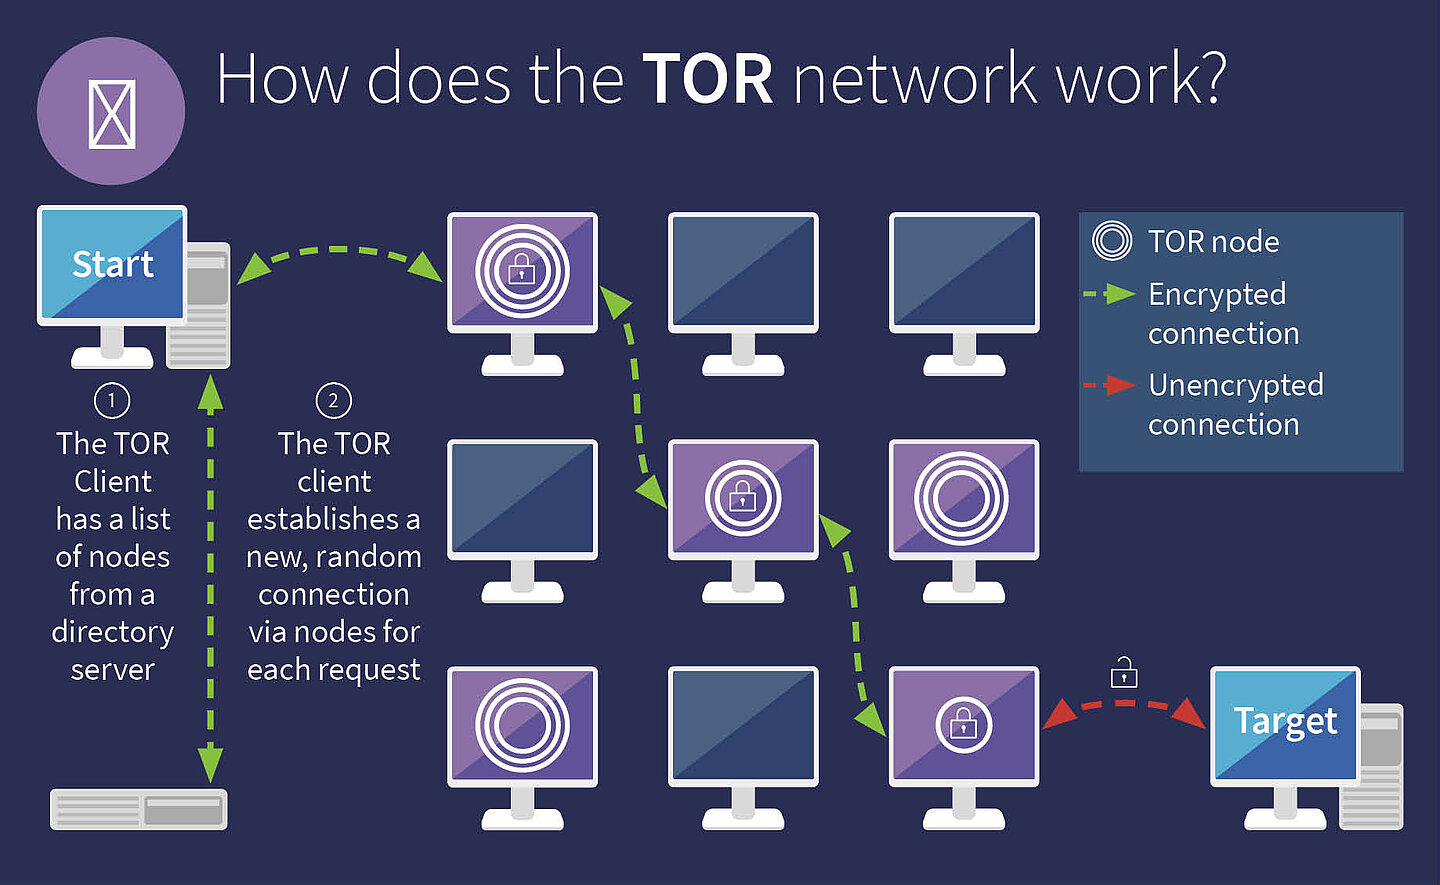 In the TOR network, a request is always sent via new nodes.